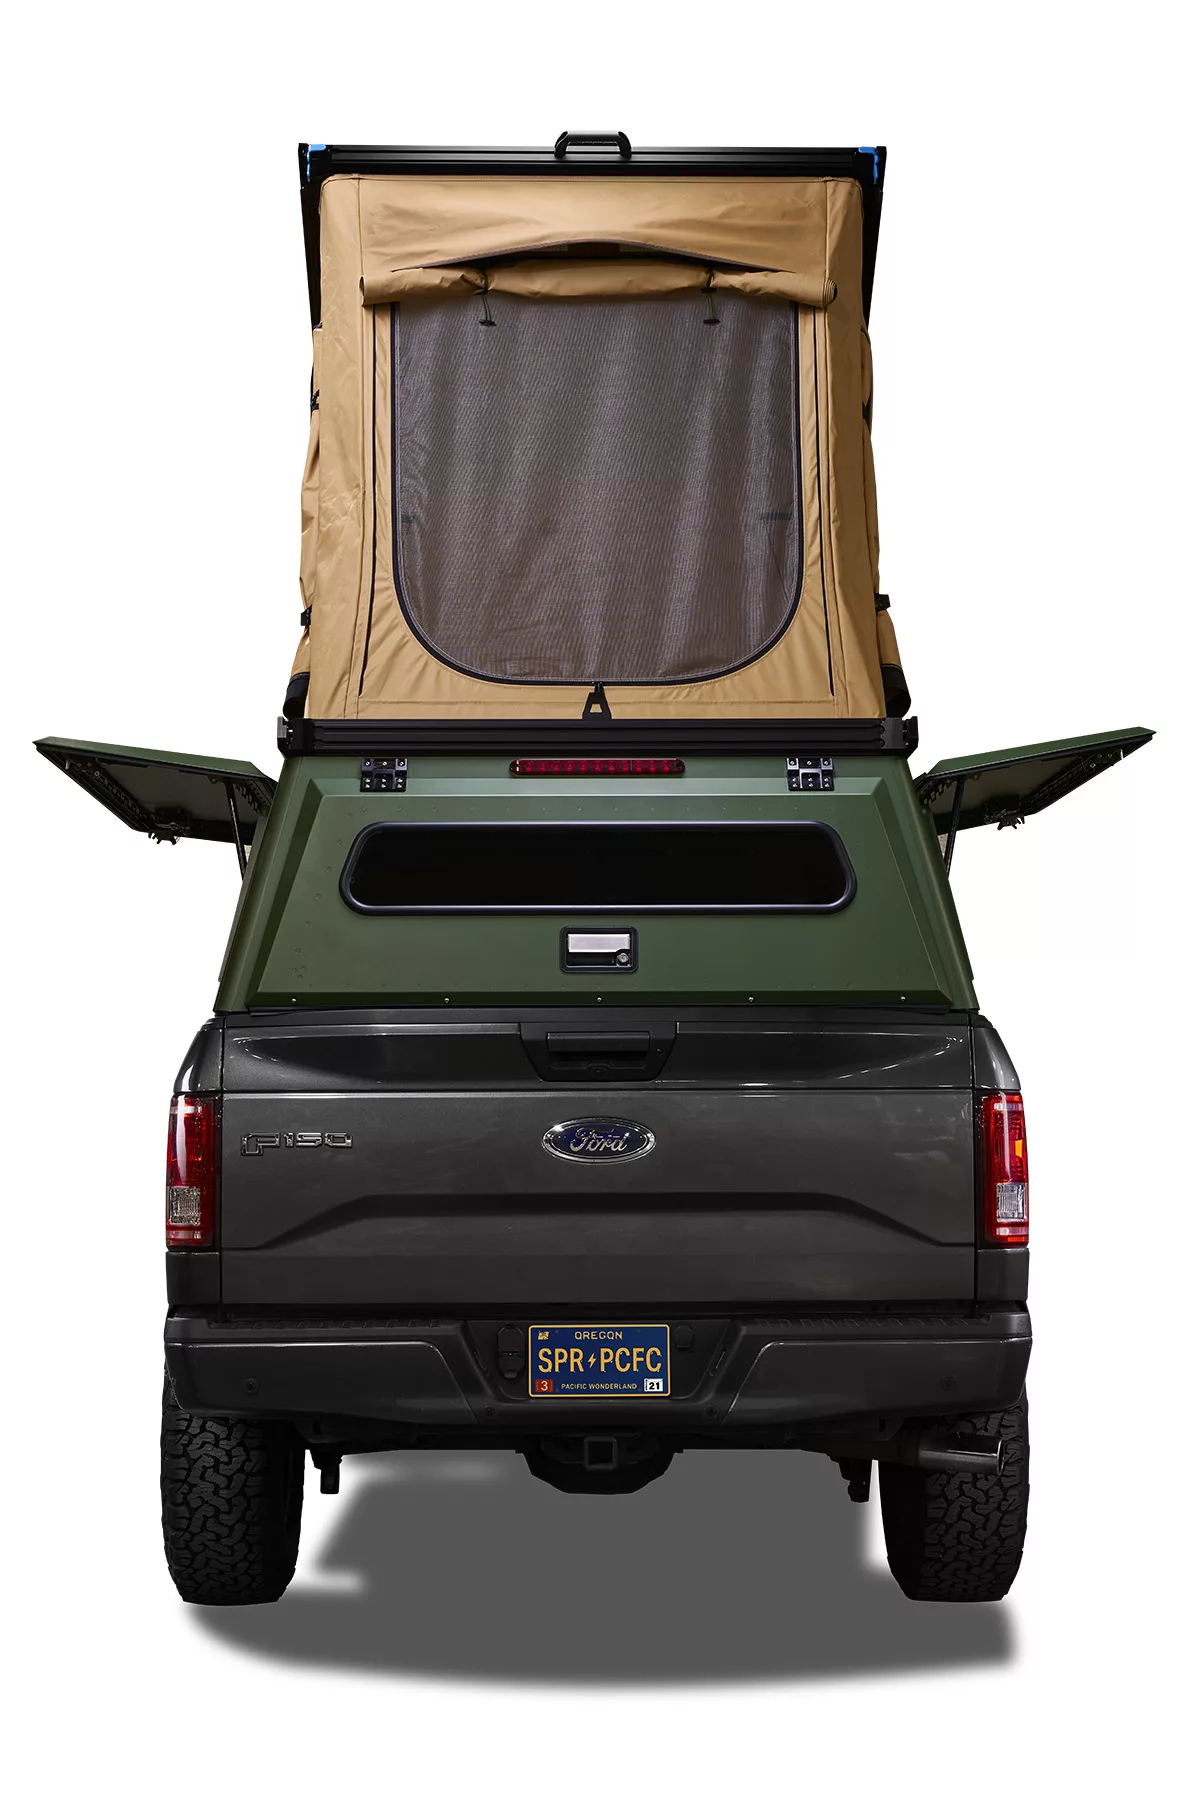 Rear view of Ford F150 with X1 Truck Camper mounted on the back, with the tent open.